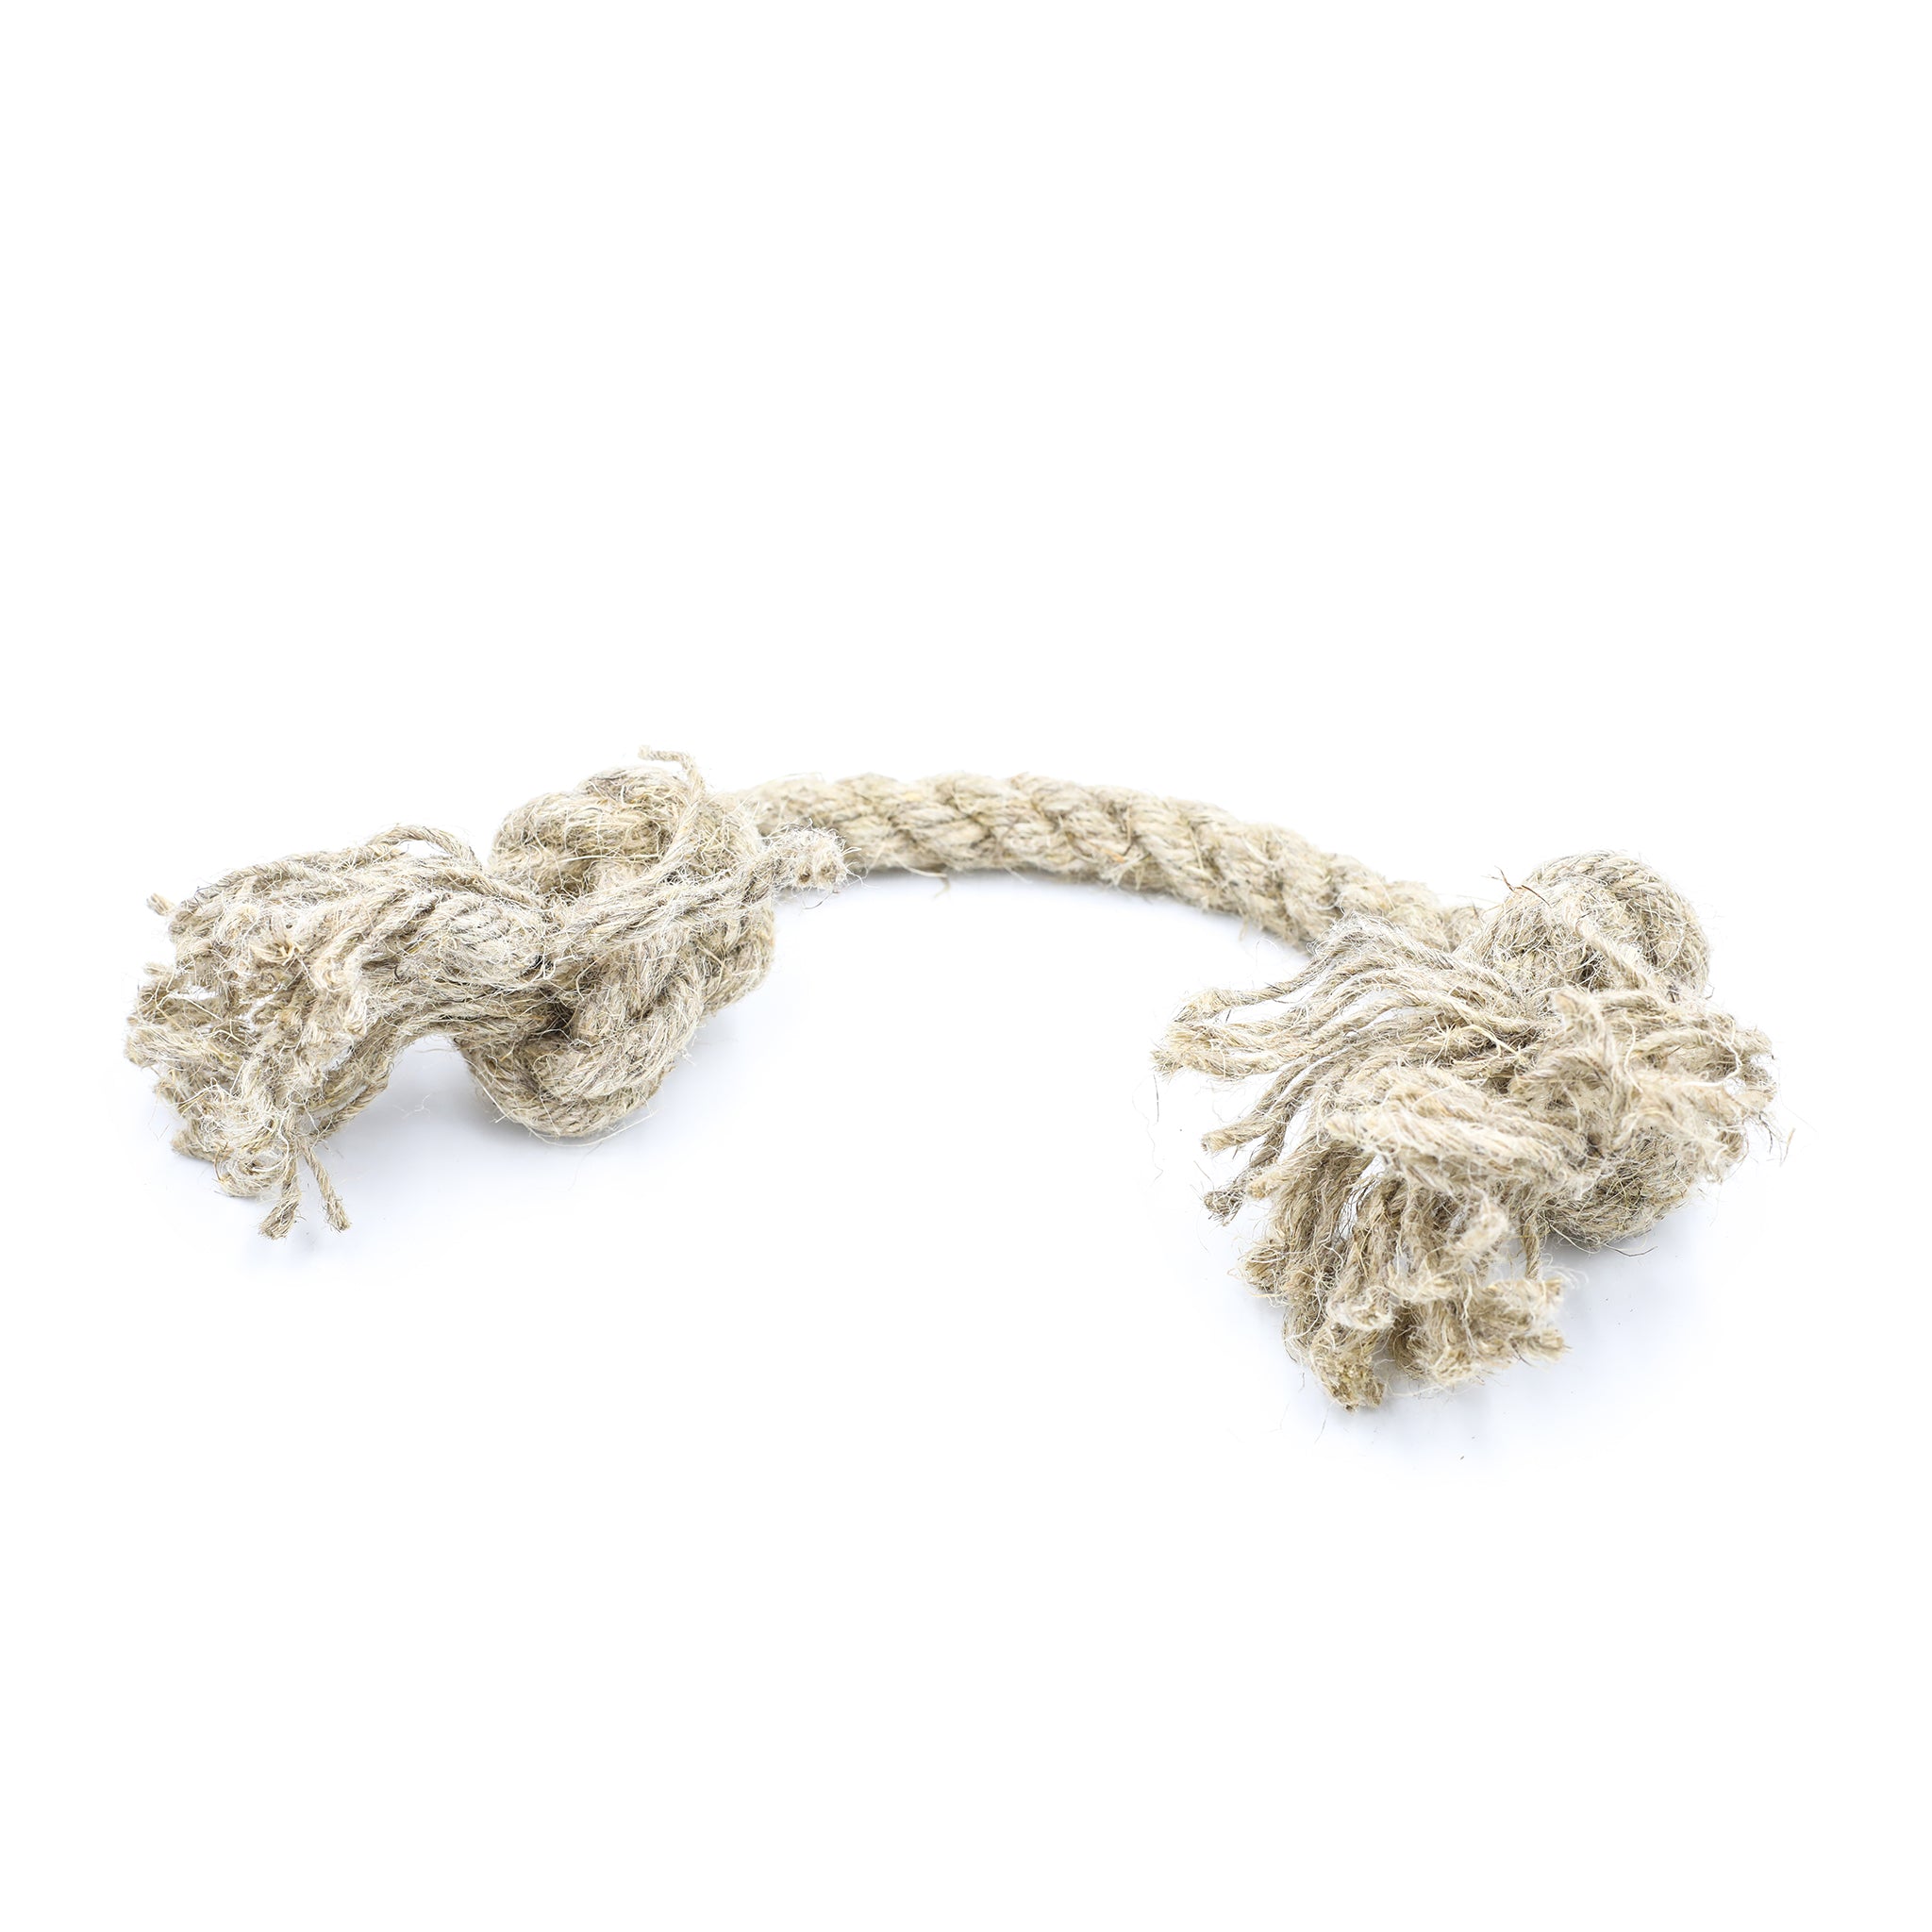 A small natural jute hemp knotted rope toy sits upon a white background. This natural knotted dog toy has two knots and this is the smaller size. The toy is laid lightly curved across the white space